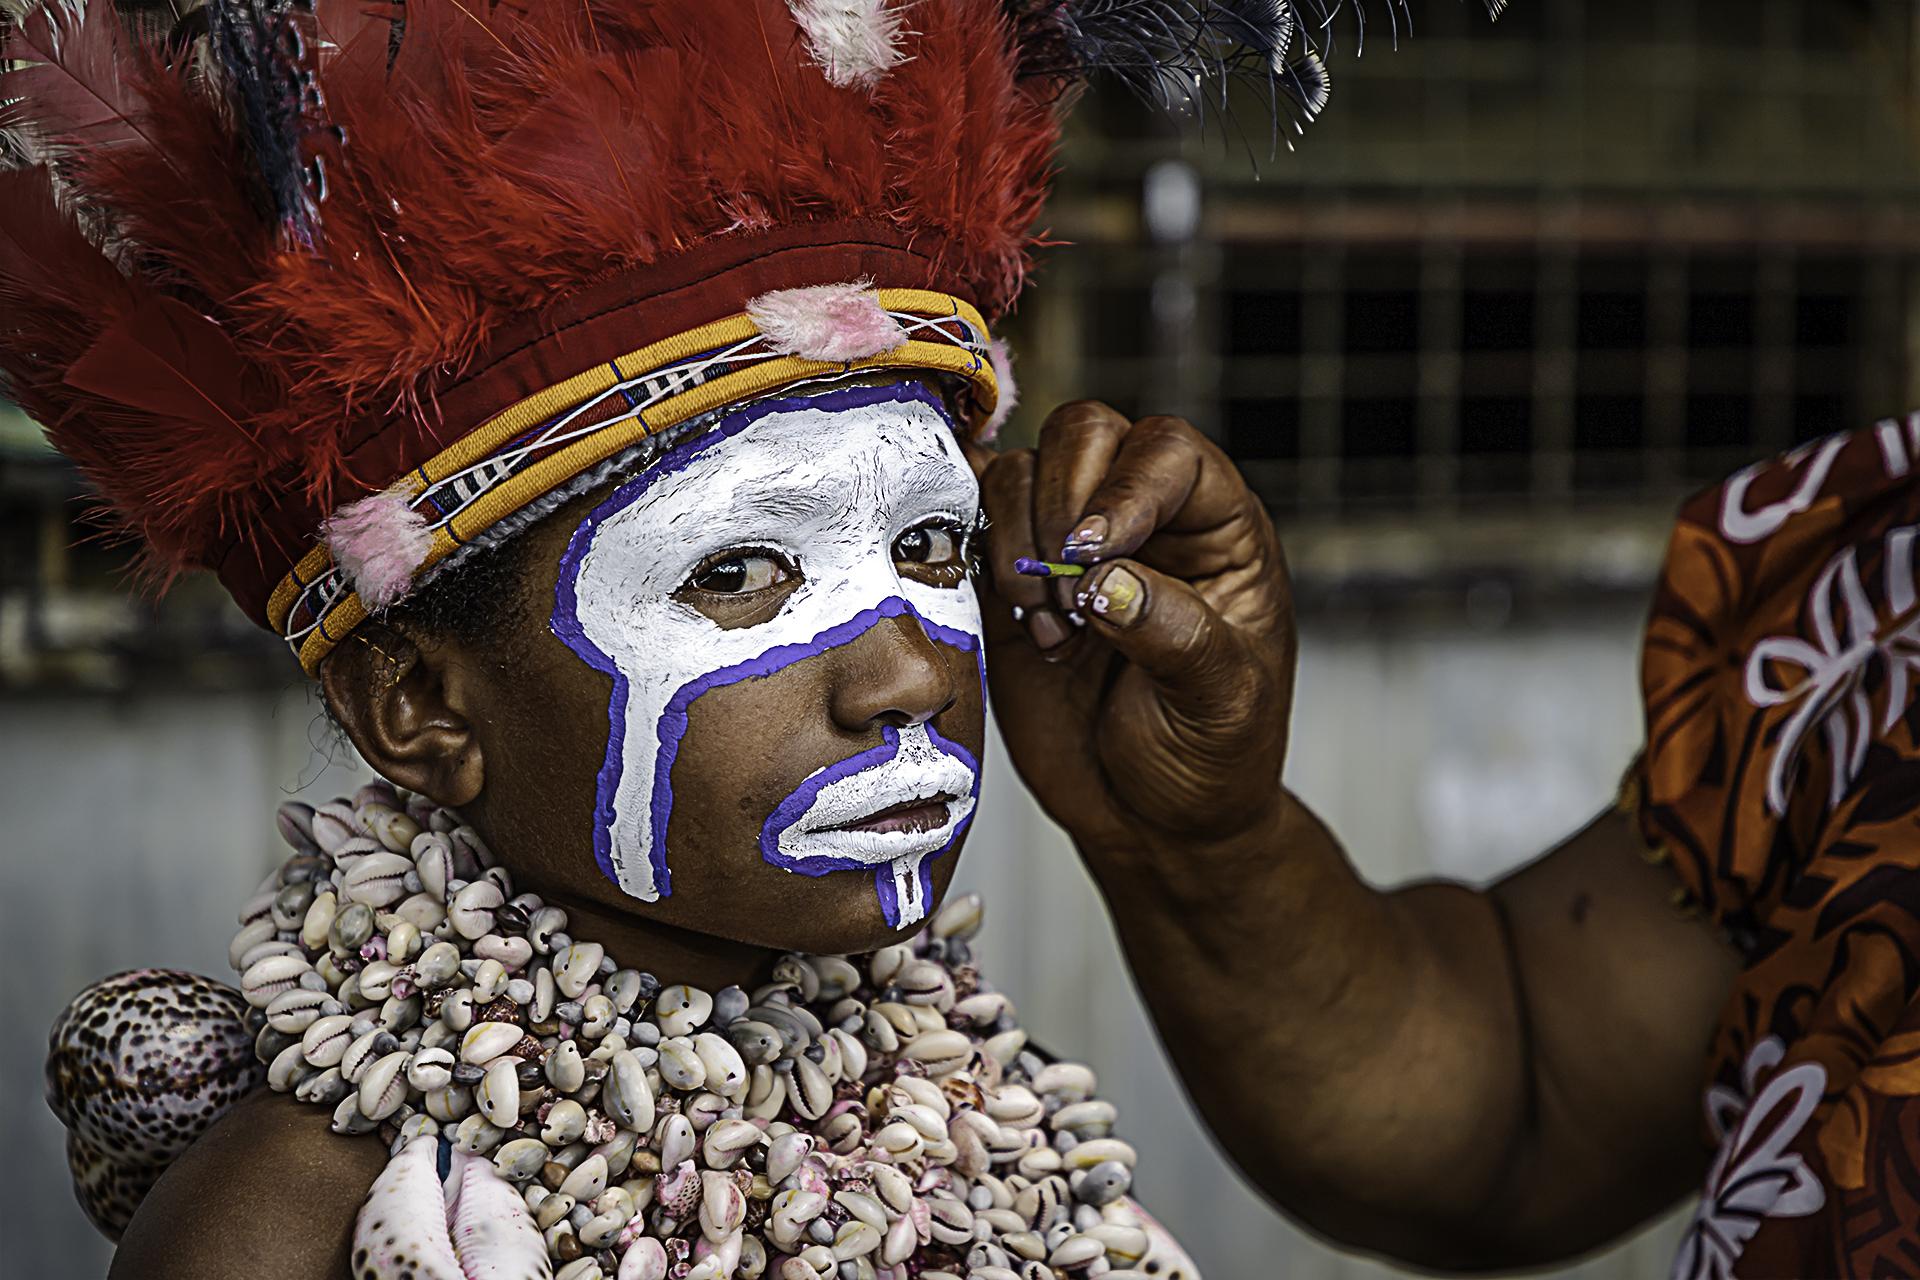 New York Photography Awards Winner - Face Painting